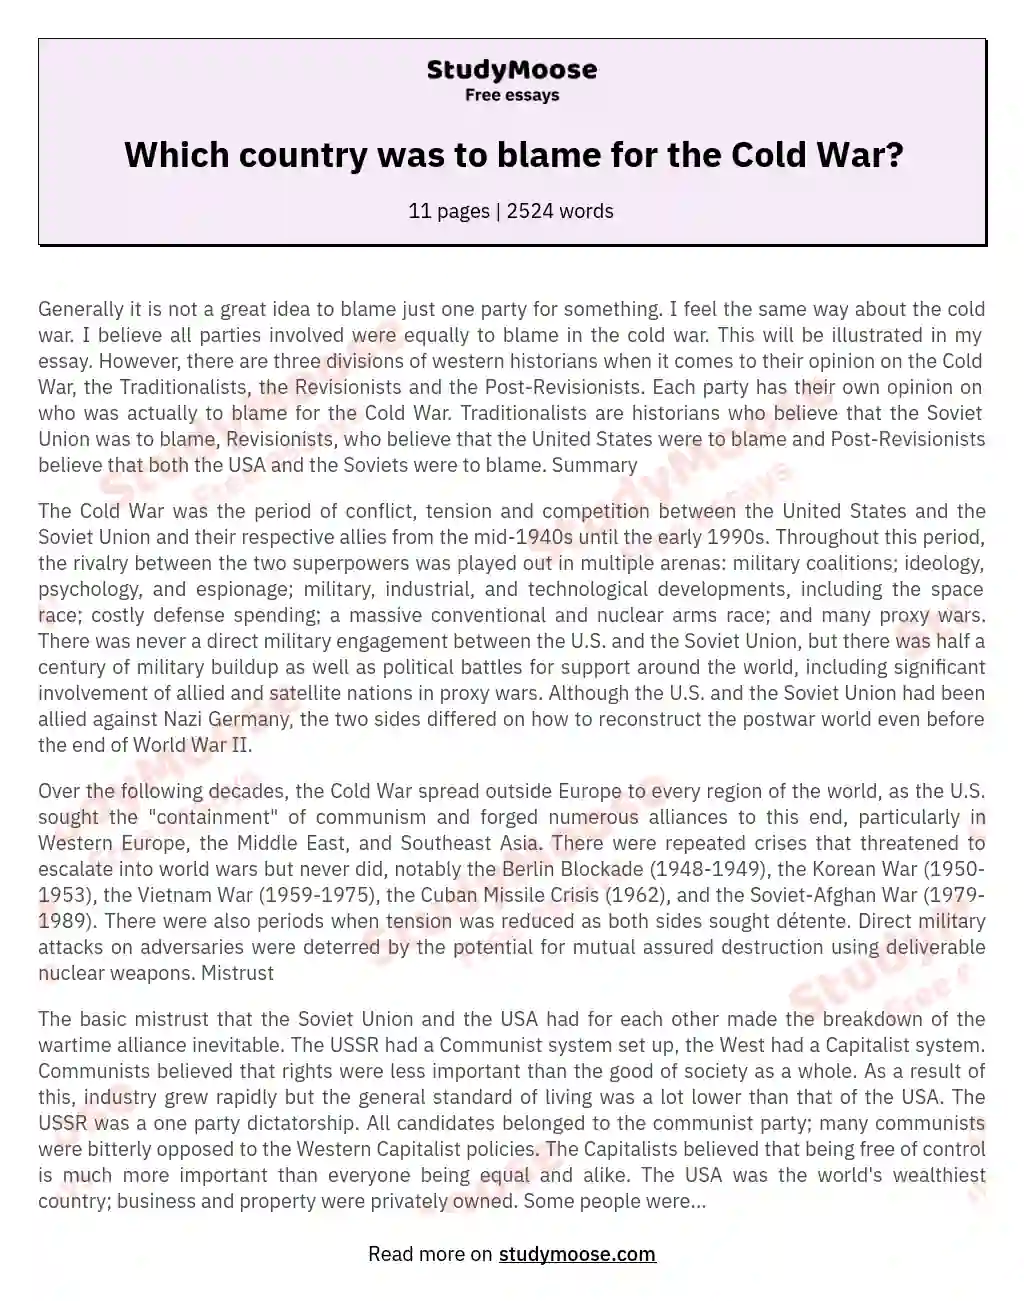 Which country was to blame for the Cold War?